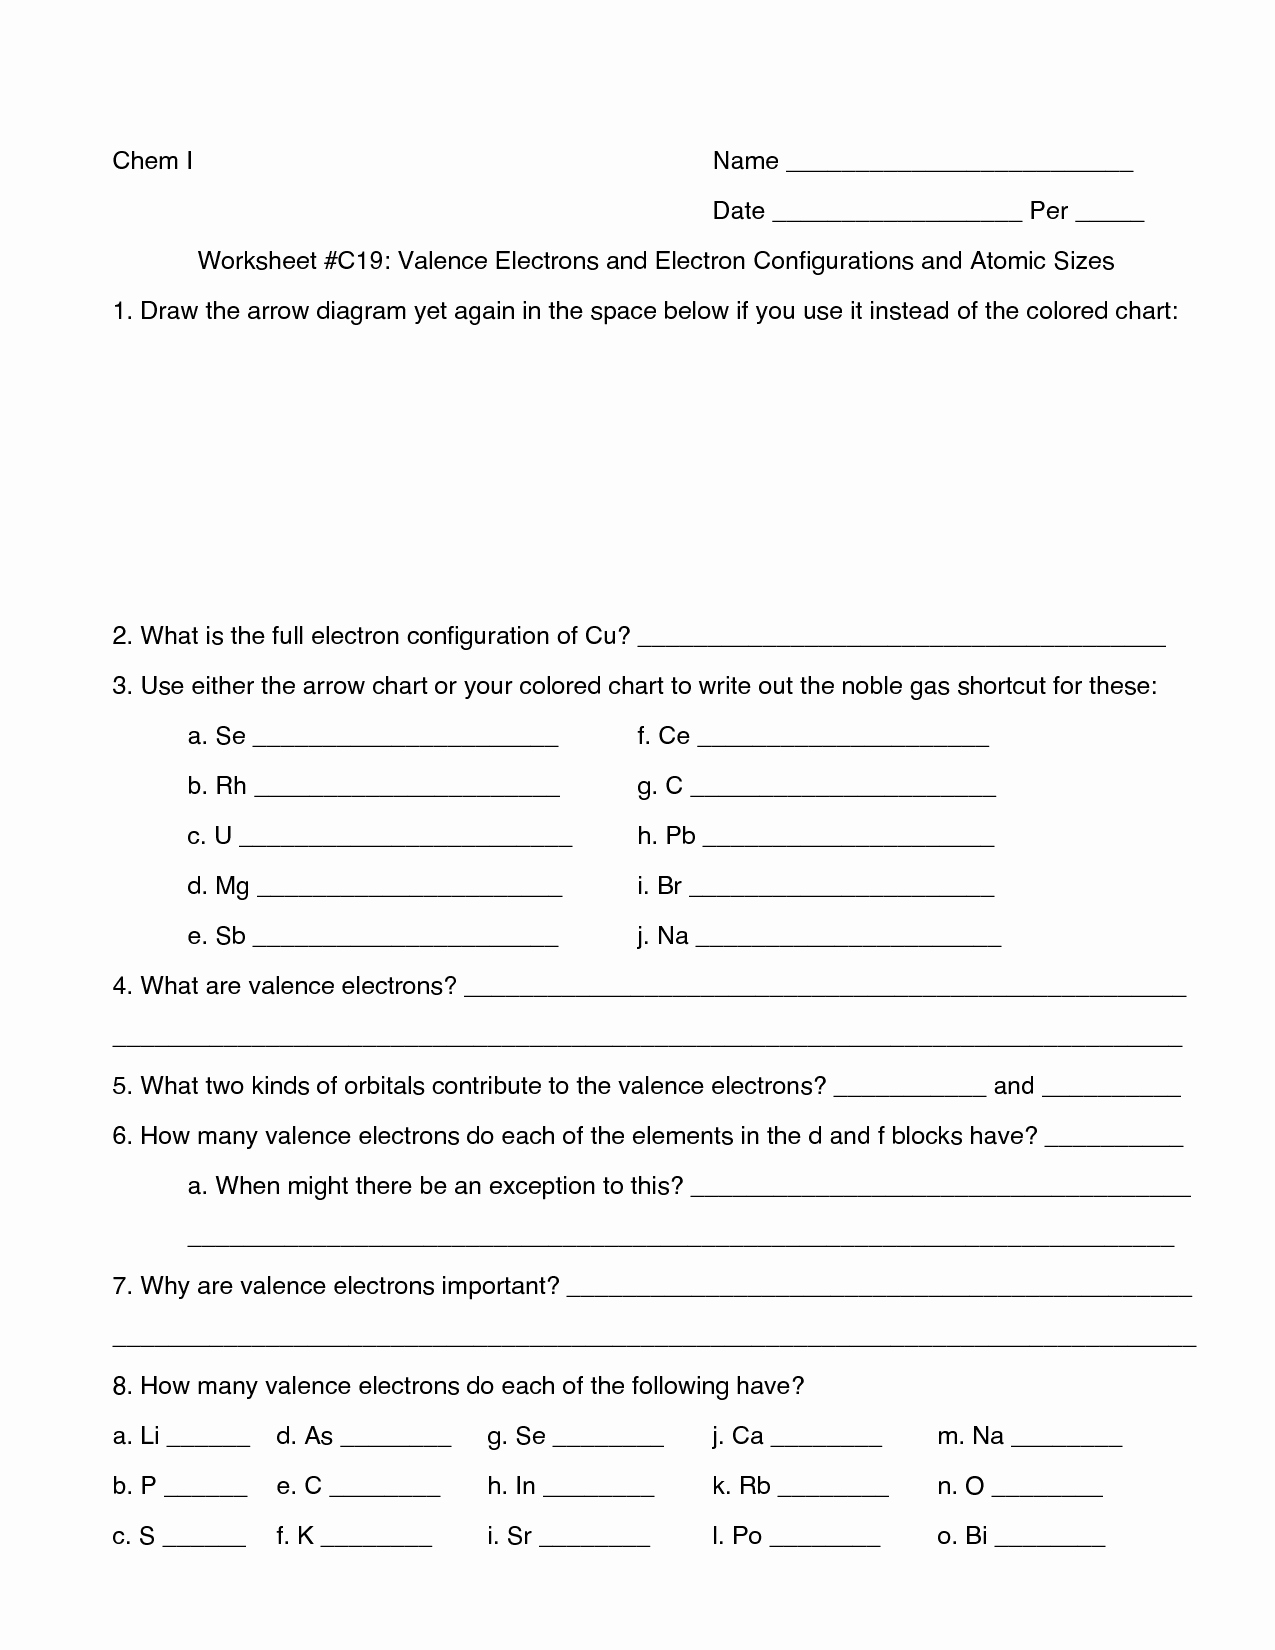 Valence Electrons Worksheet Answers Awesome Valence Electrons Worksheet